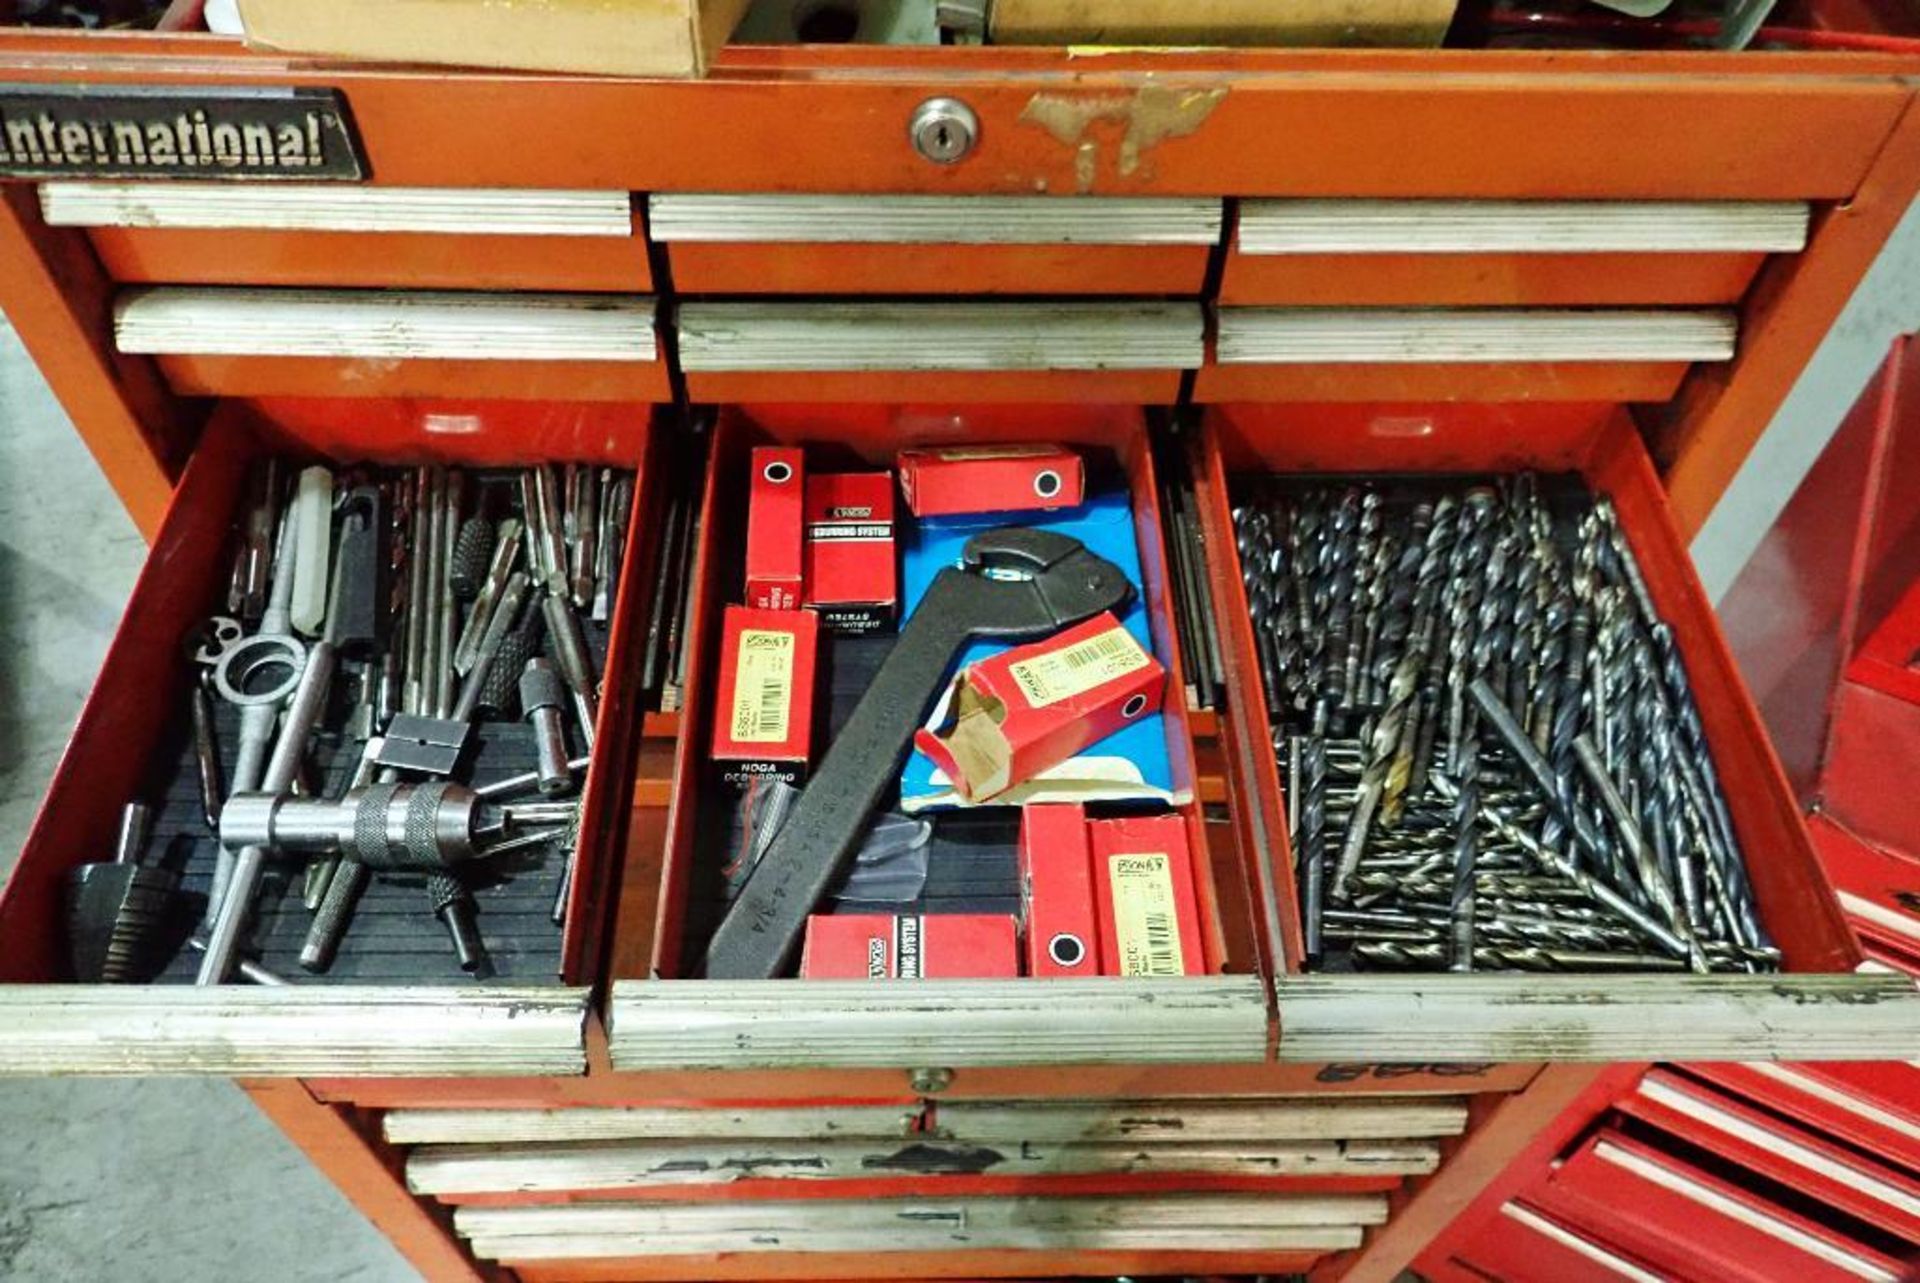 (2) tool chests with contents, wrenches, sockets, drill bits screw drivers, air tools, hammers, plie - Image 20 of 31